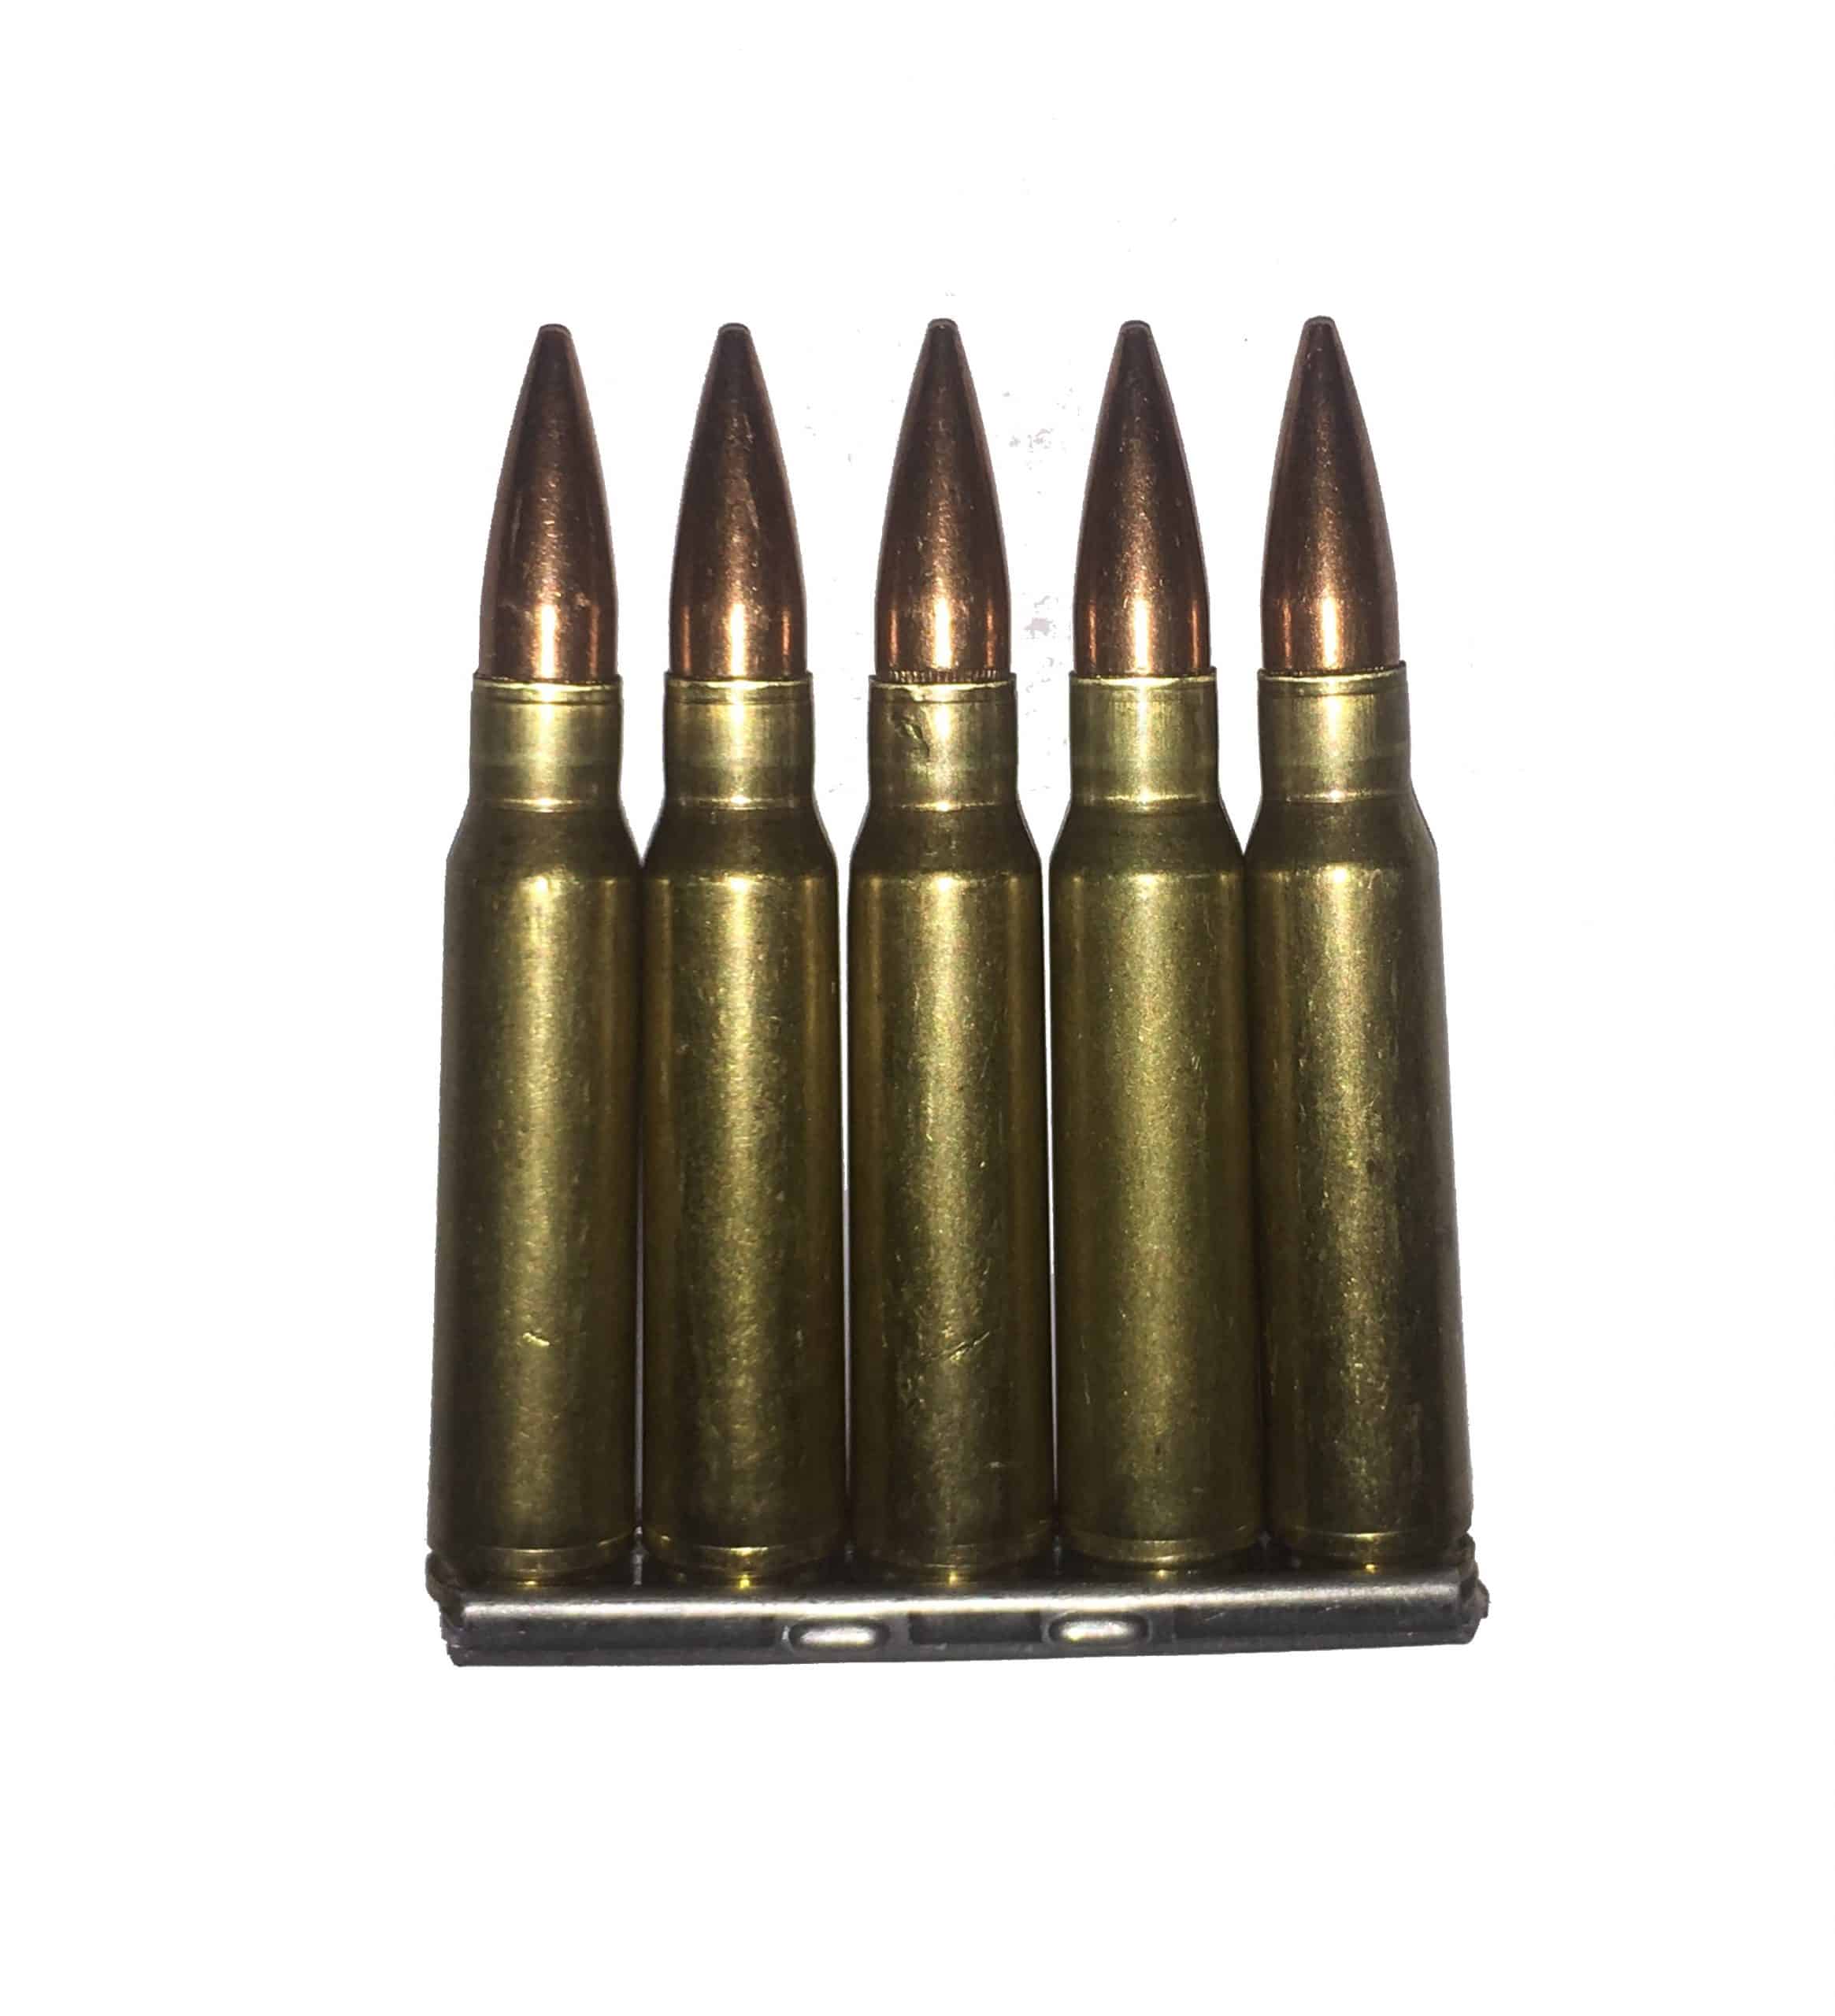 7.5x54 French MAS Dummy Rounds Snap Caps Fake Bullets in Stripper Clip J&M Spec INERT